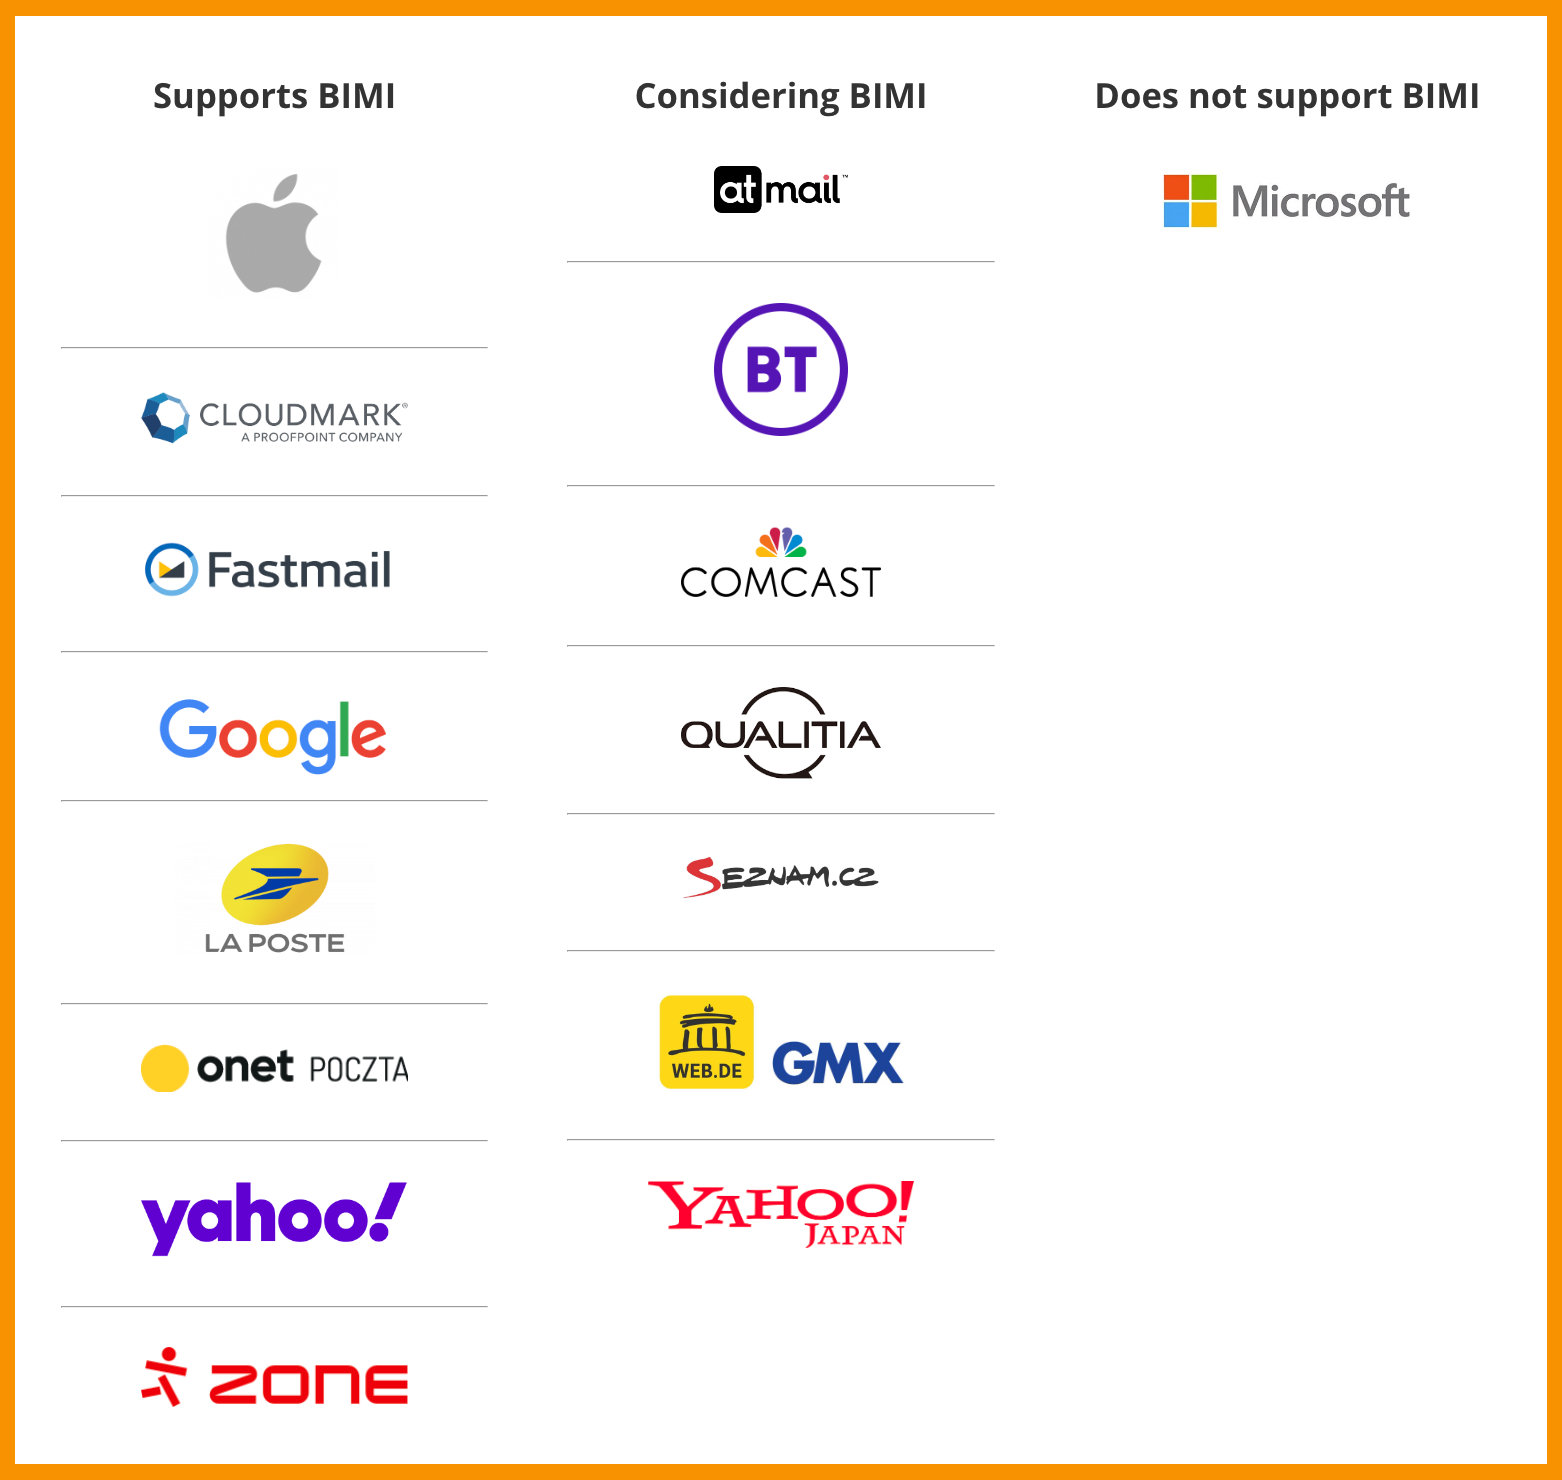 support chart from BIMI of mailbox providers. BIMI is currently supported on:Apple (iOS 16, iPadOS 16, and macOS Ventura 13 or later, and iCloud.com) Cloudmark Fastmail Google La Poste Onet Poczta Yahoo (excluding Yahoo Japan) Zone Providers considering BIMI include: Atmail BT Mail Comcast Qualitia Seznam Web.de GMX Yahoo Japan